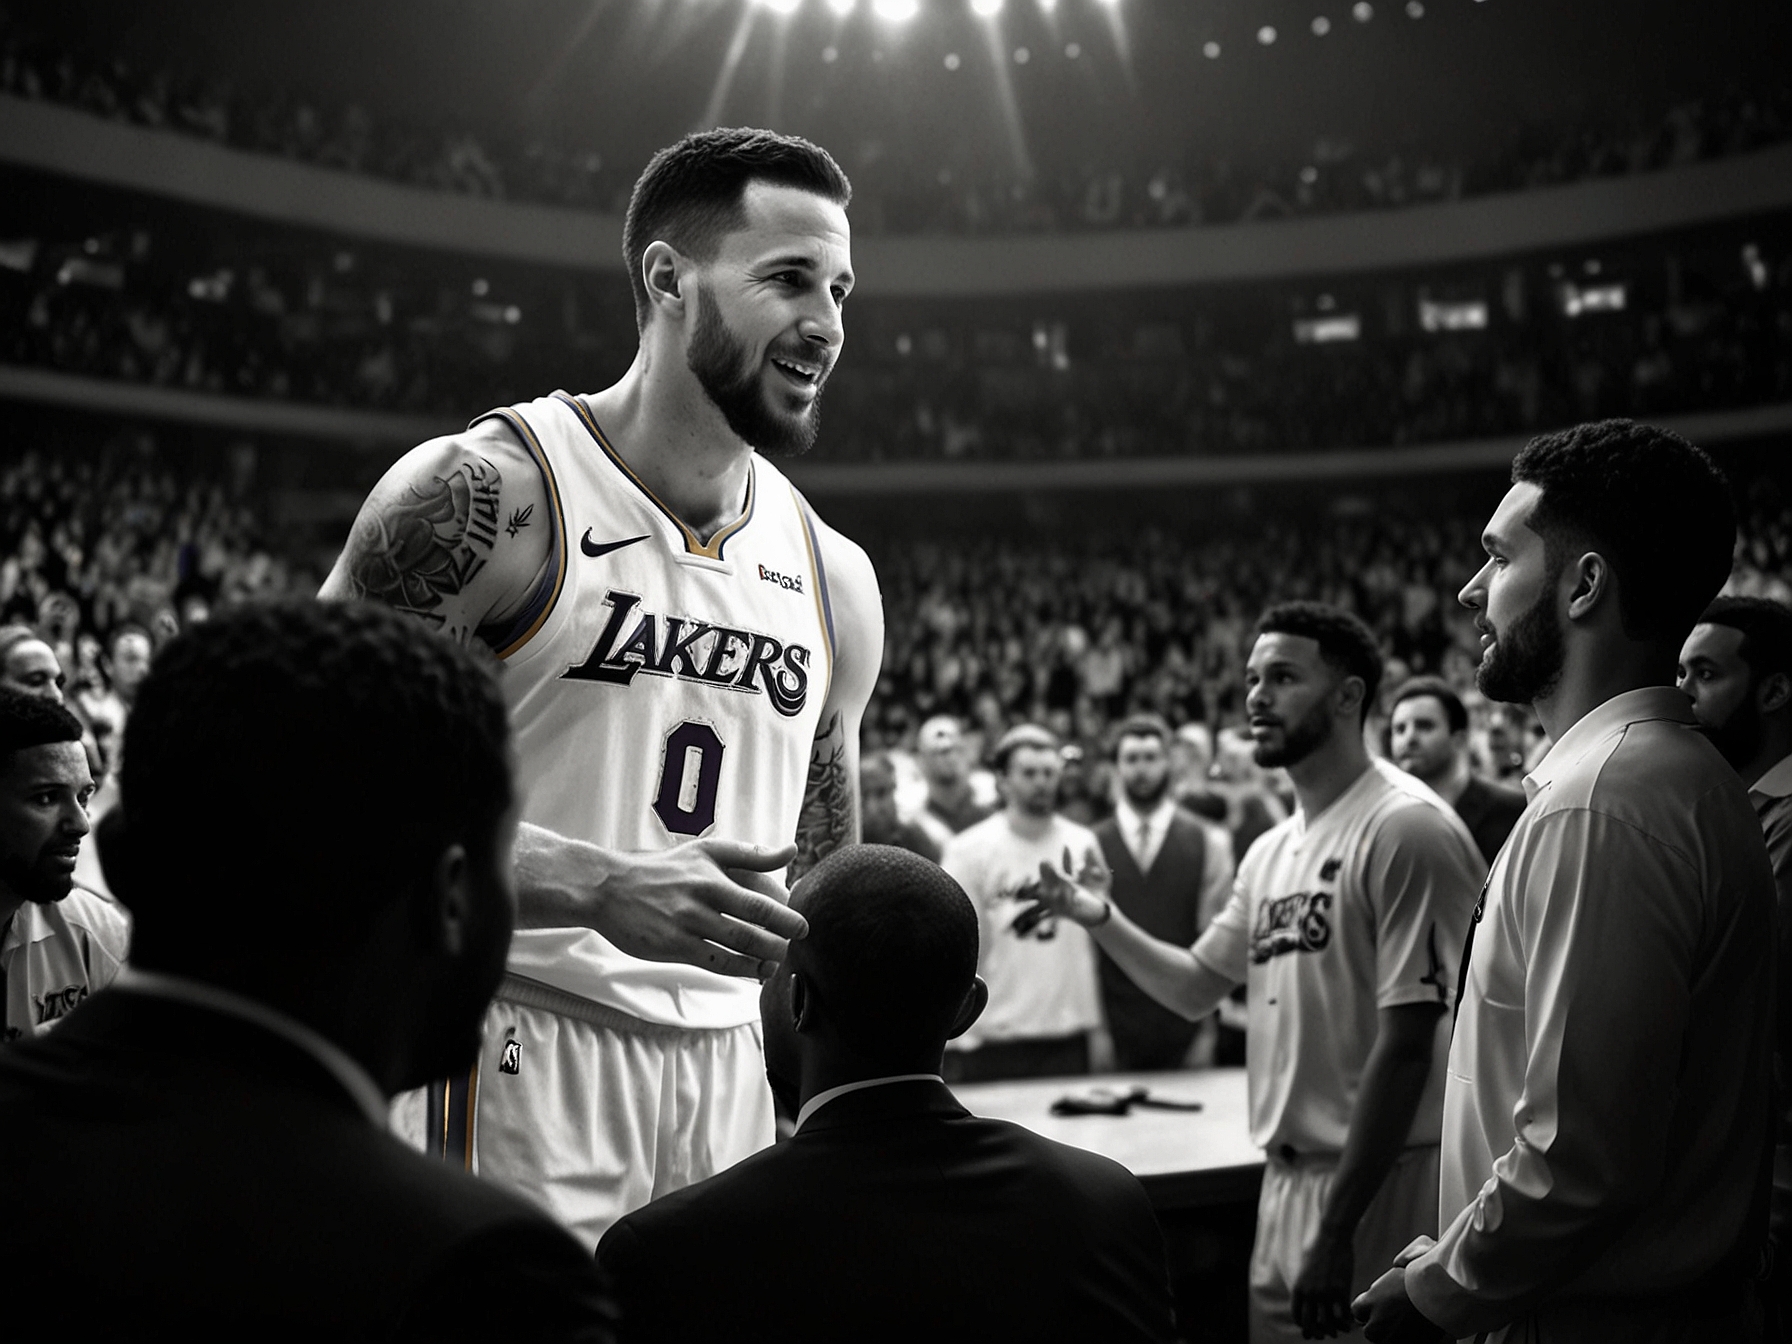 Darvin Ham giving a farewell speech in front of Lakers players and staff, as JJ Redick shakes hands with team executives in the background, symbolizing transition and new beginnings.